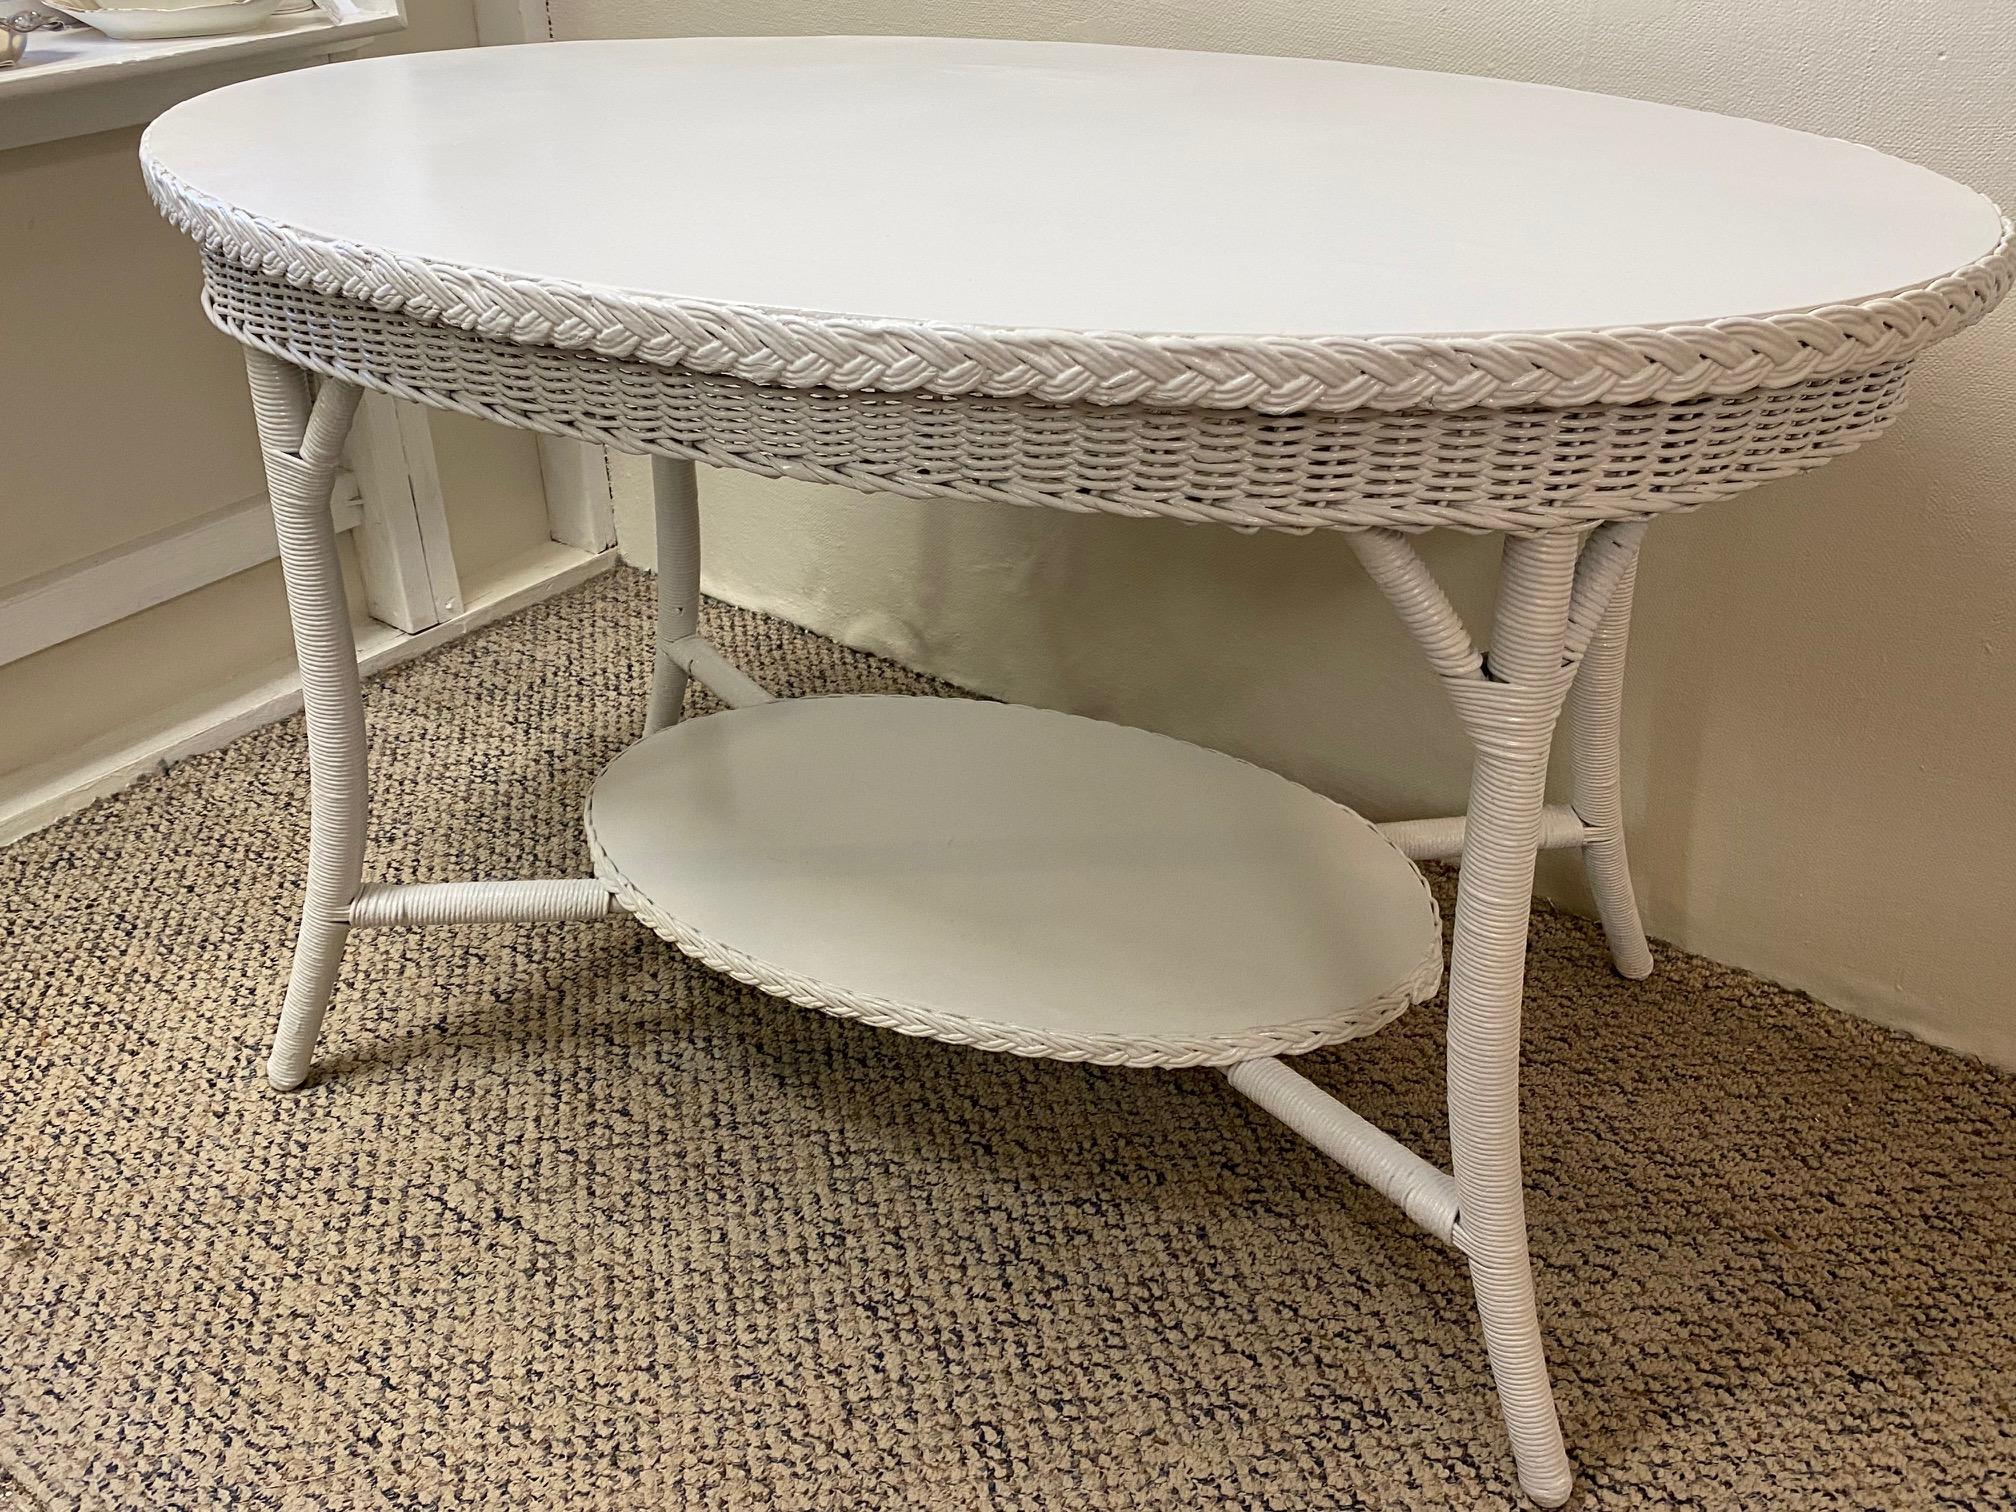 Vintage American Wicker Company White Painted Oval Dining Table For Sale 1